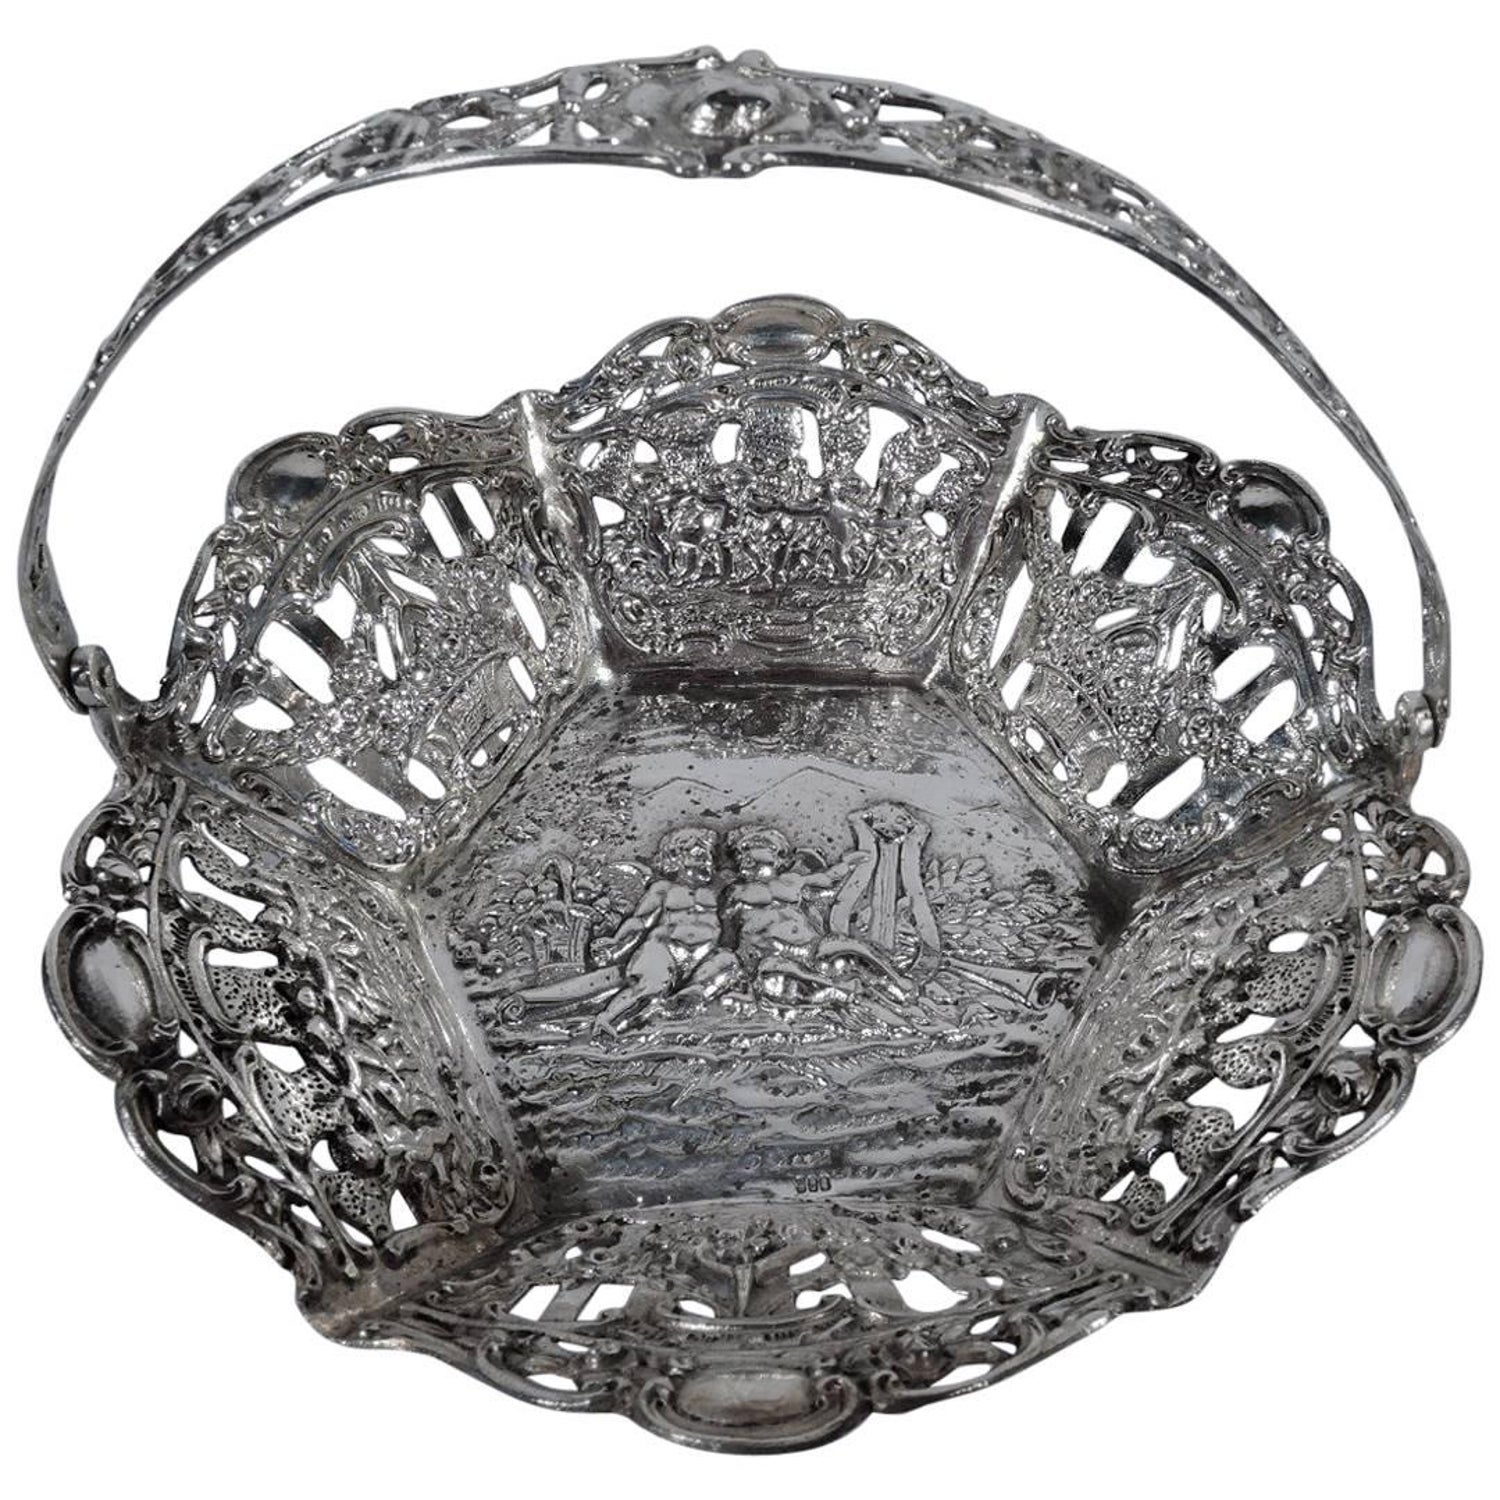 Antique German Rococo Silver Basket For Sale at 1stDibs